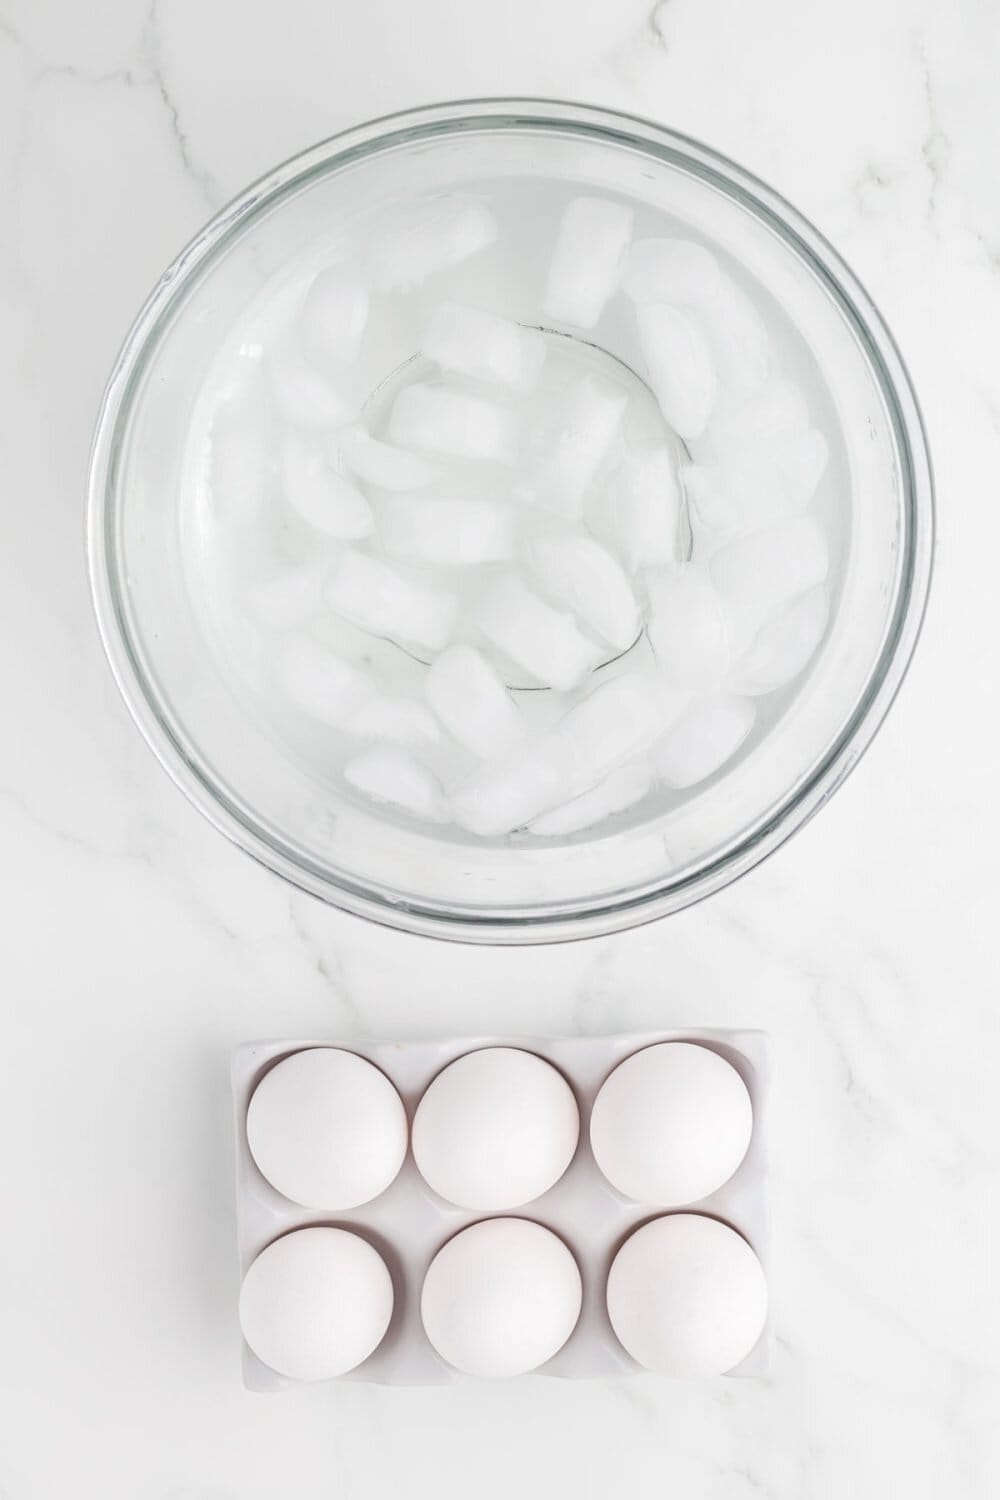 a clear mixing bowl of ice water next to a half dozen eggs laying on the table